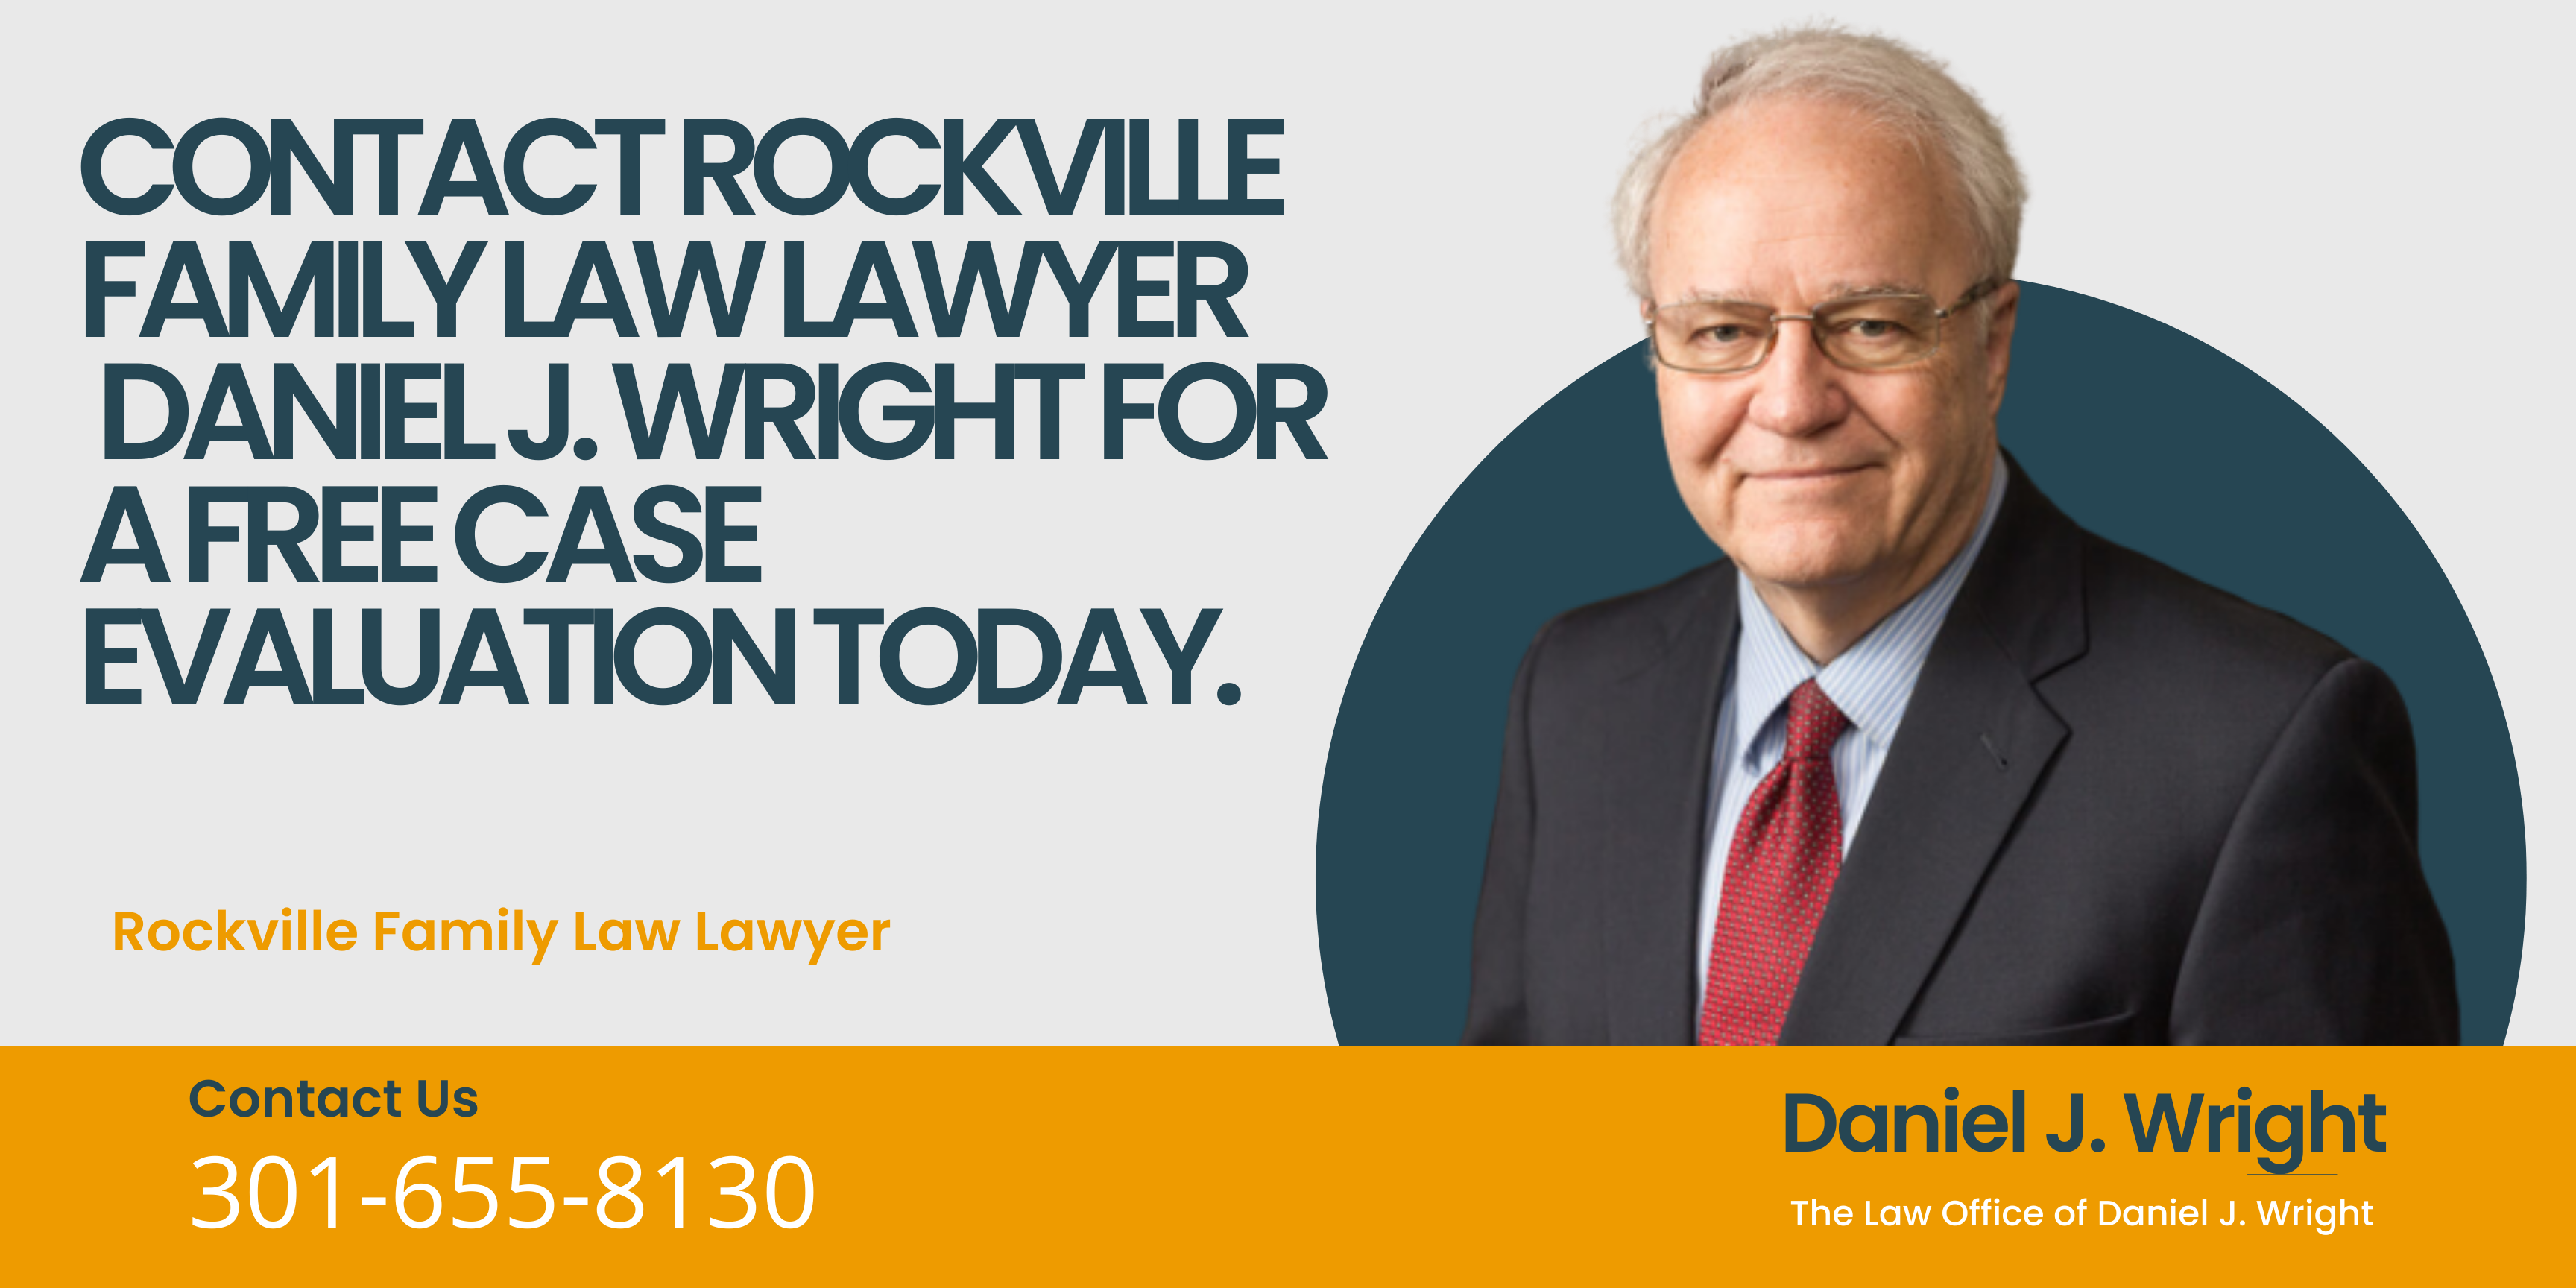 Contact Rockville Family Law Attorney Daniel J. Wright